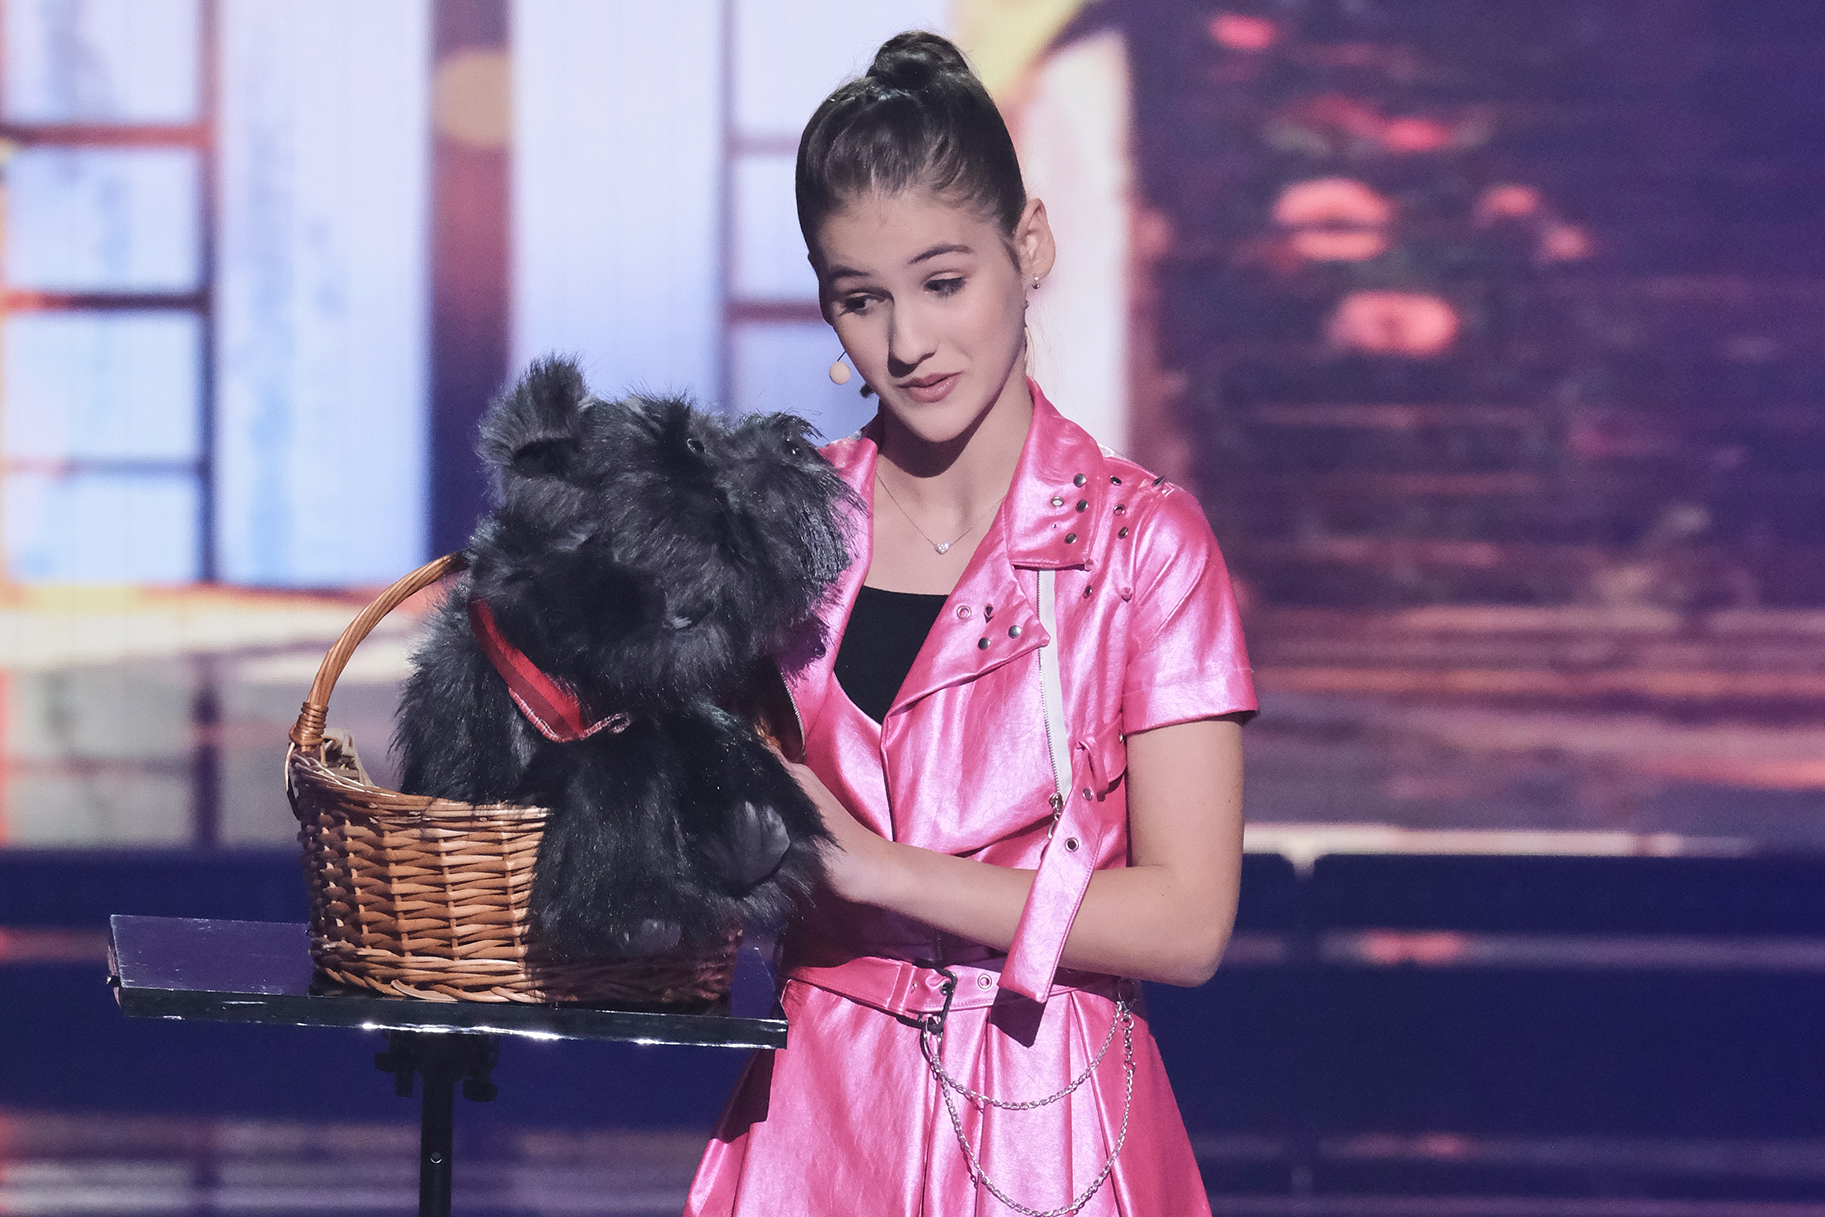 See Why This 13YearOld Singing Ventriloquist Shocked the AGT All